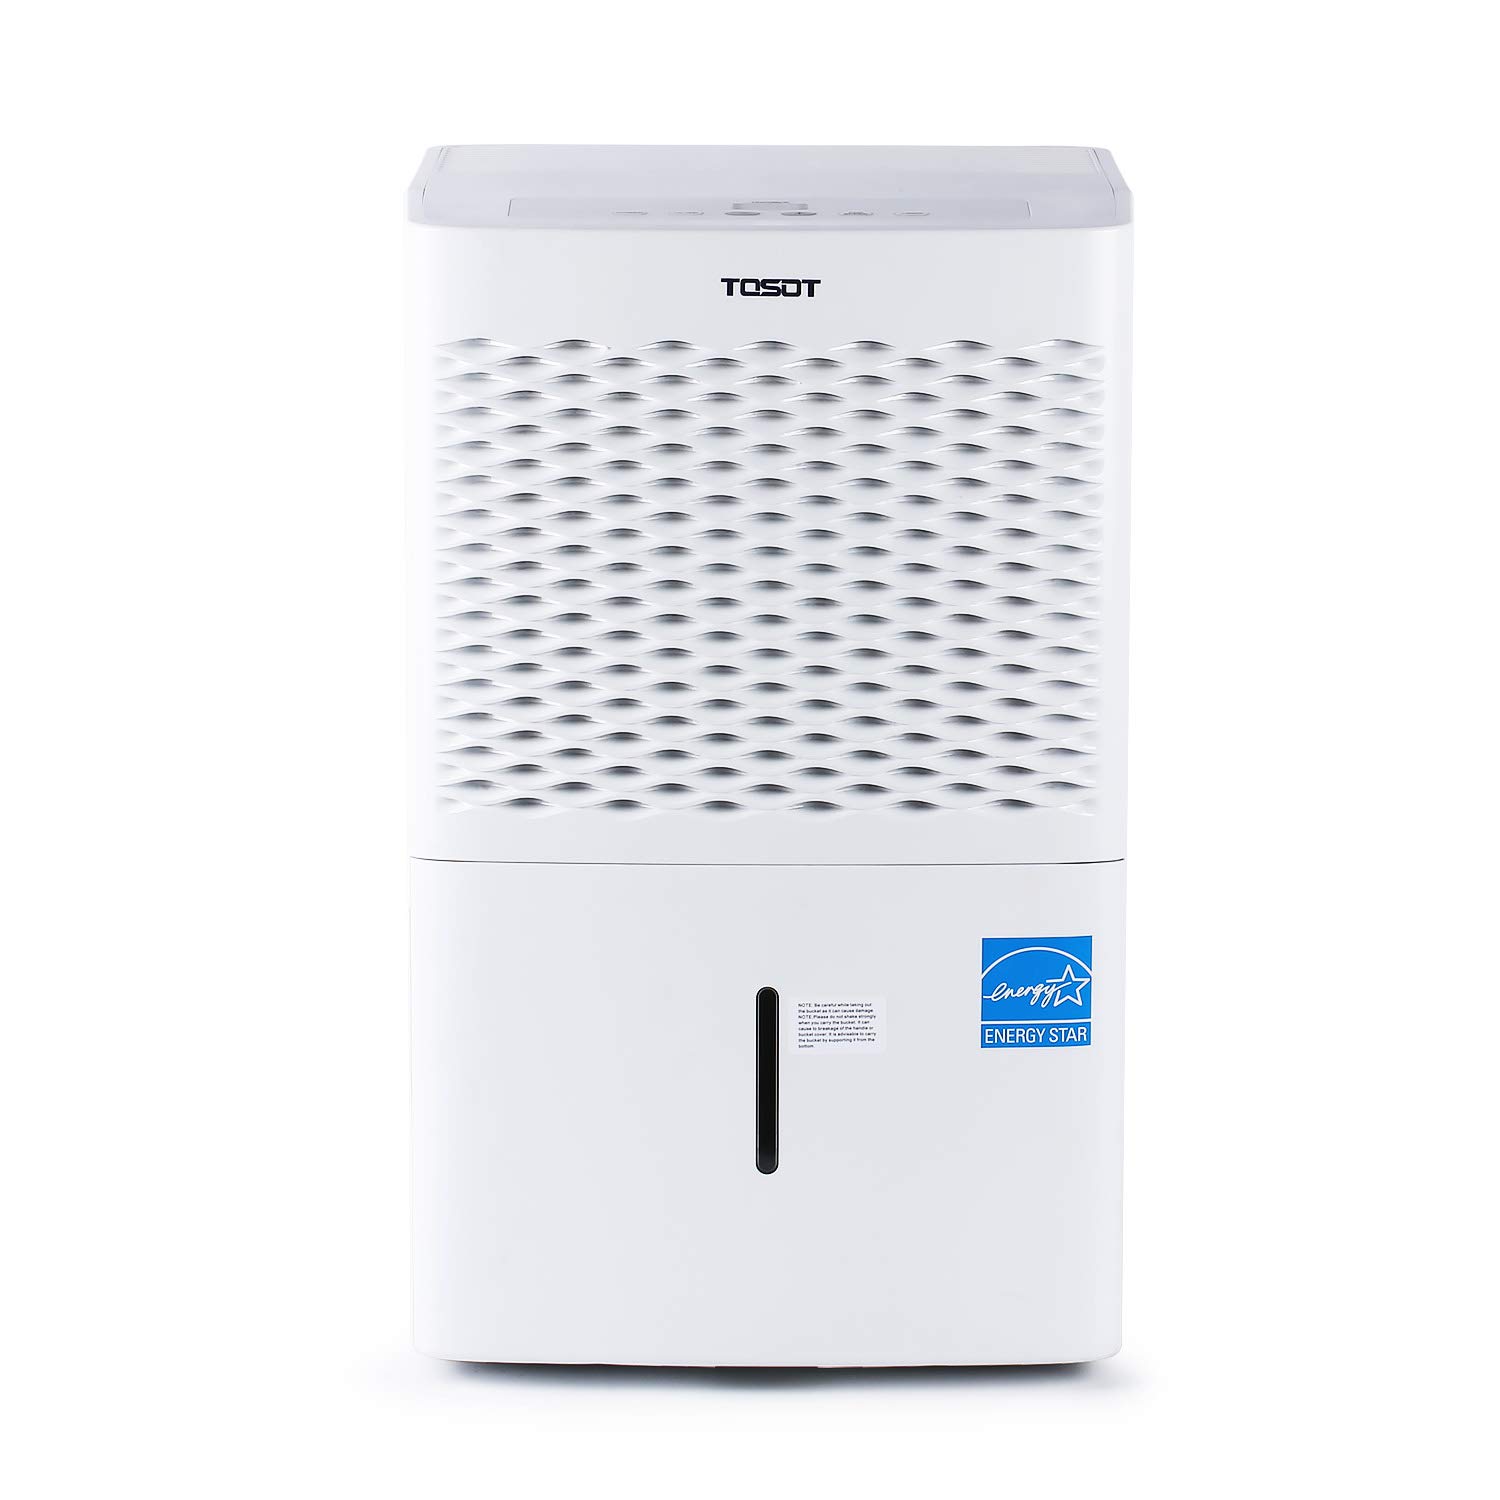 TOSOT 70 Pint Dehumidifier with Pump